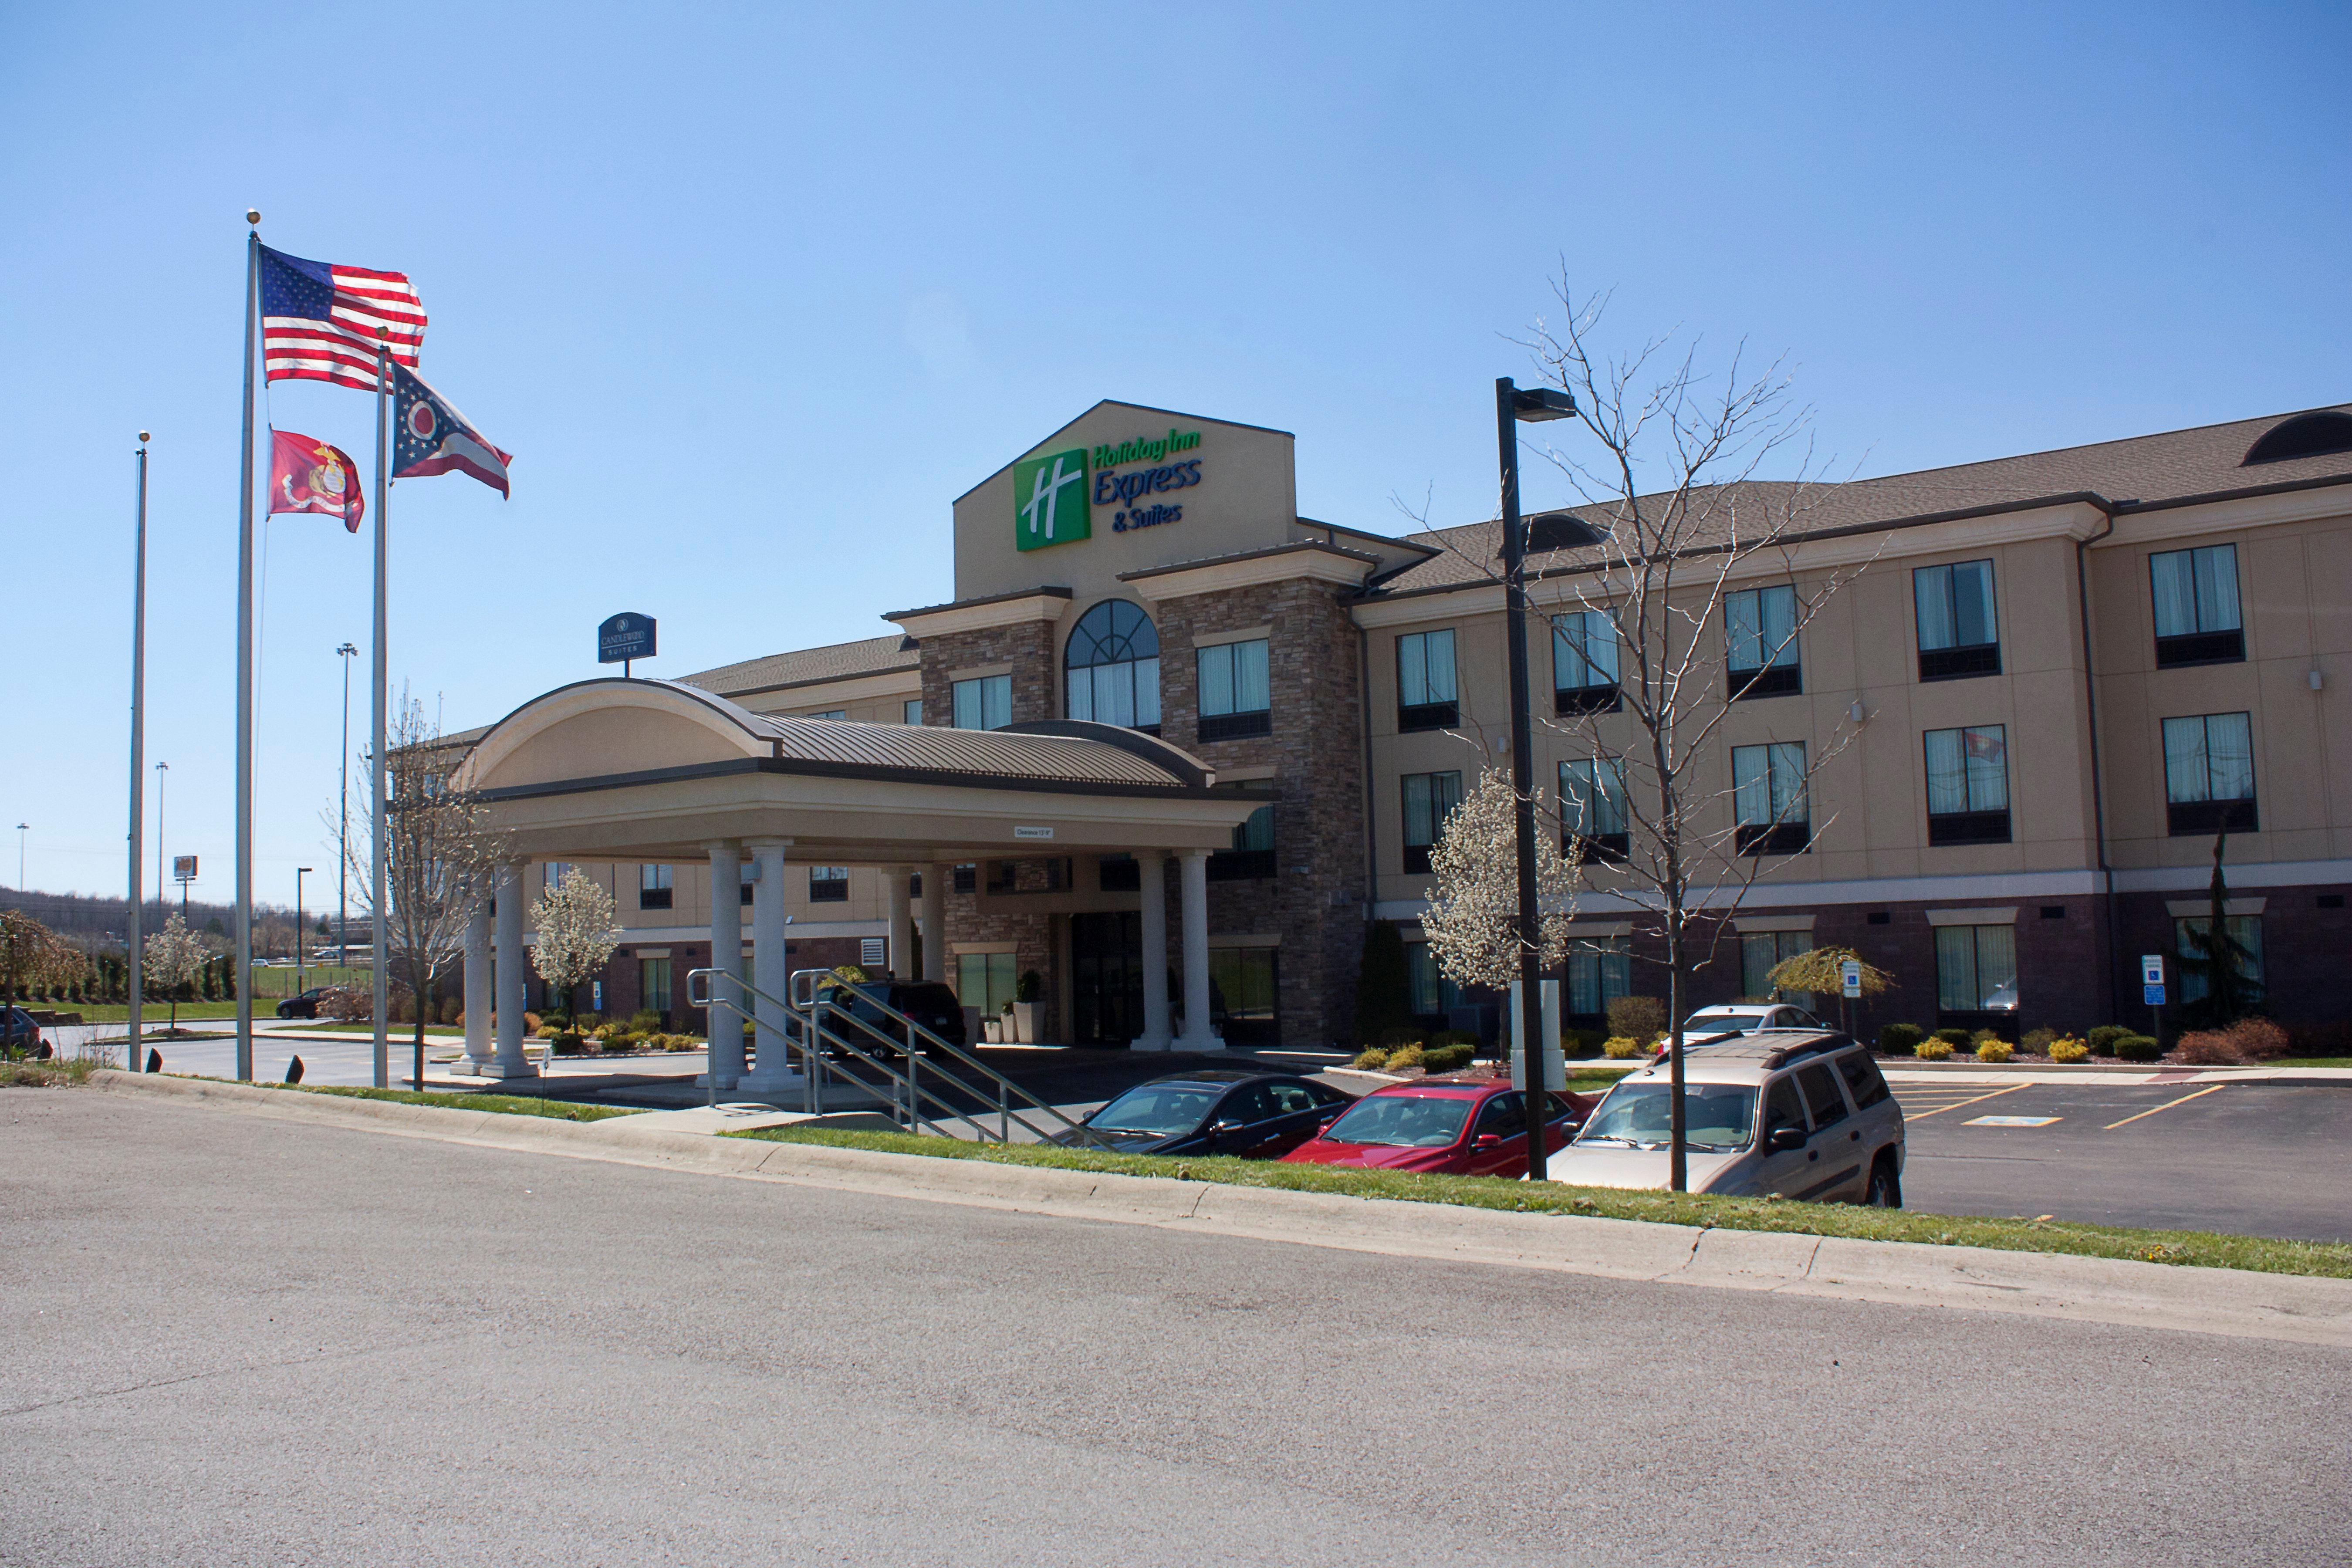 Home2 Suites By Hilton Youngstown Exterior photo